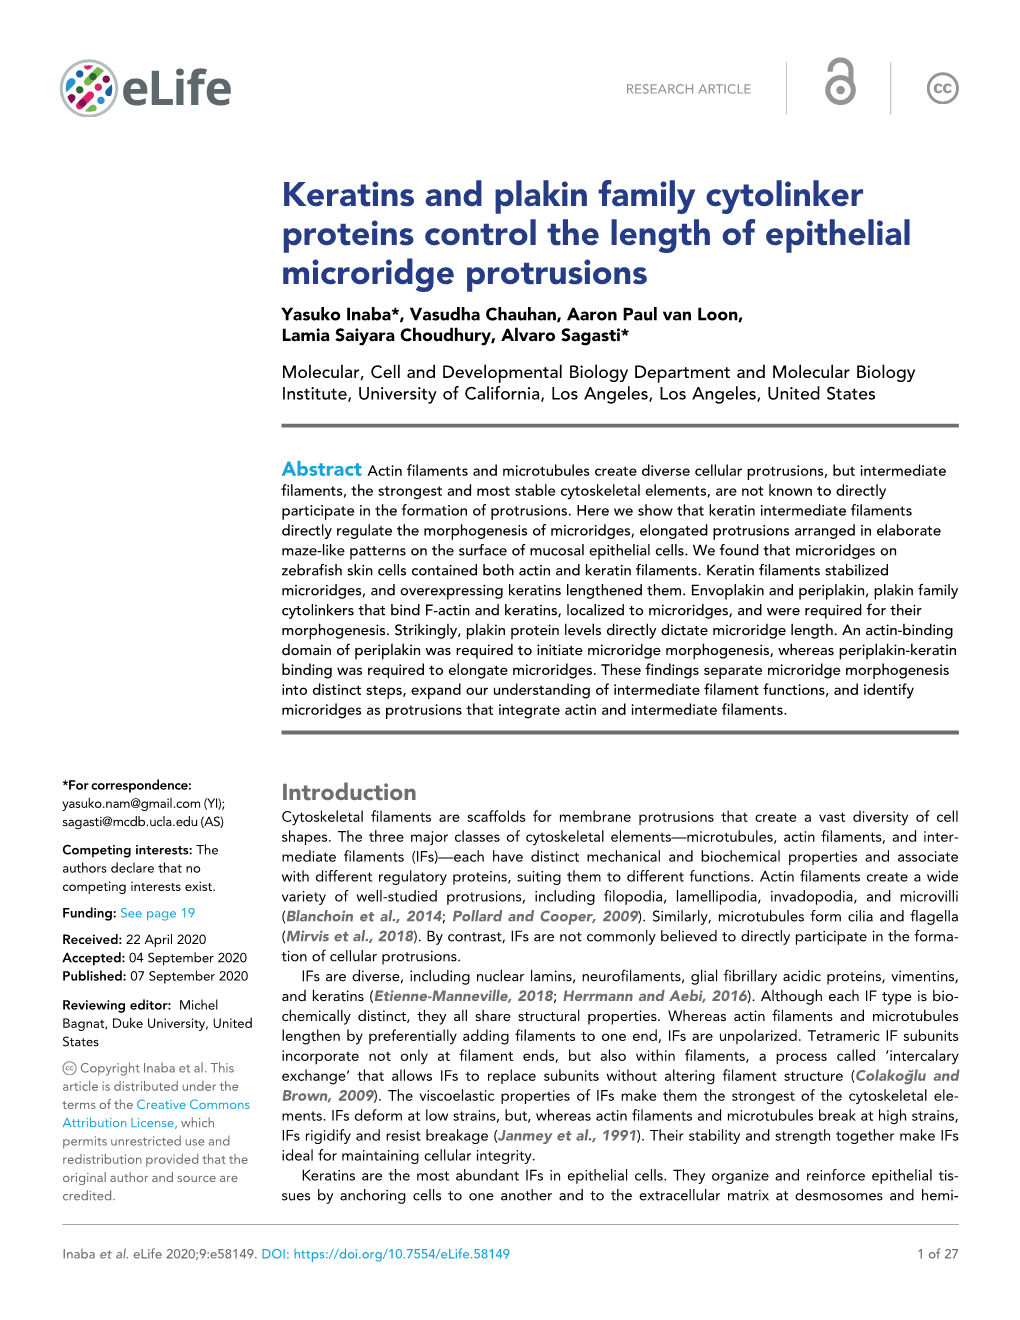 Keratins and Plakin Family Cytolinker Proteins Control the Length Of